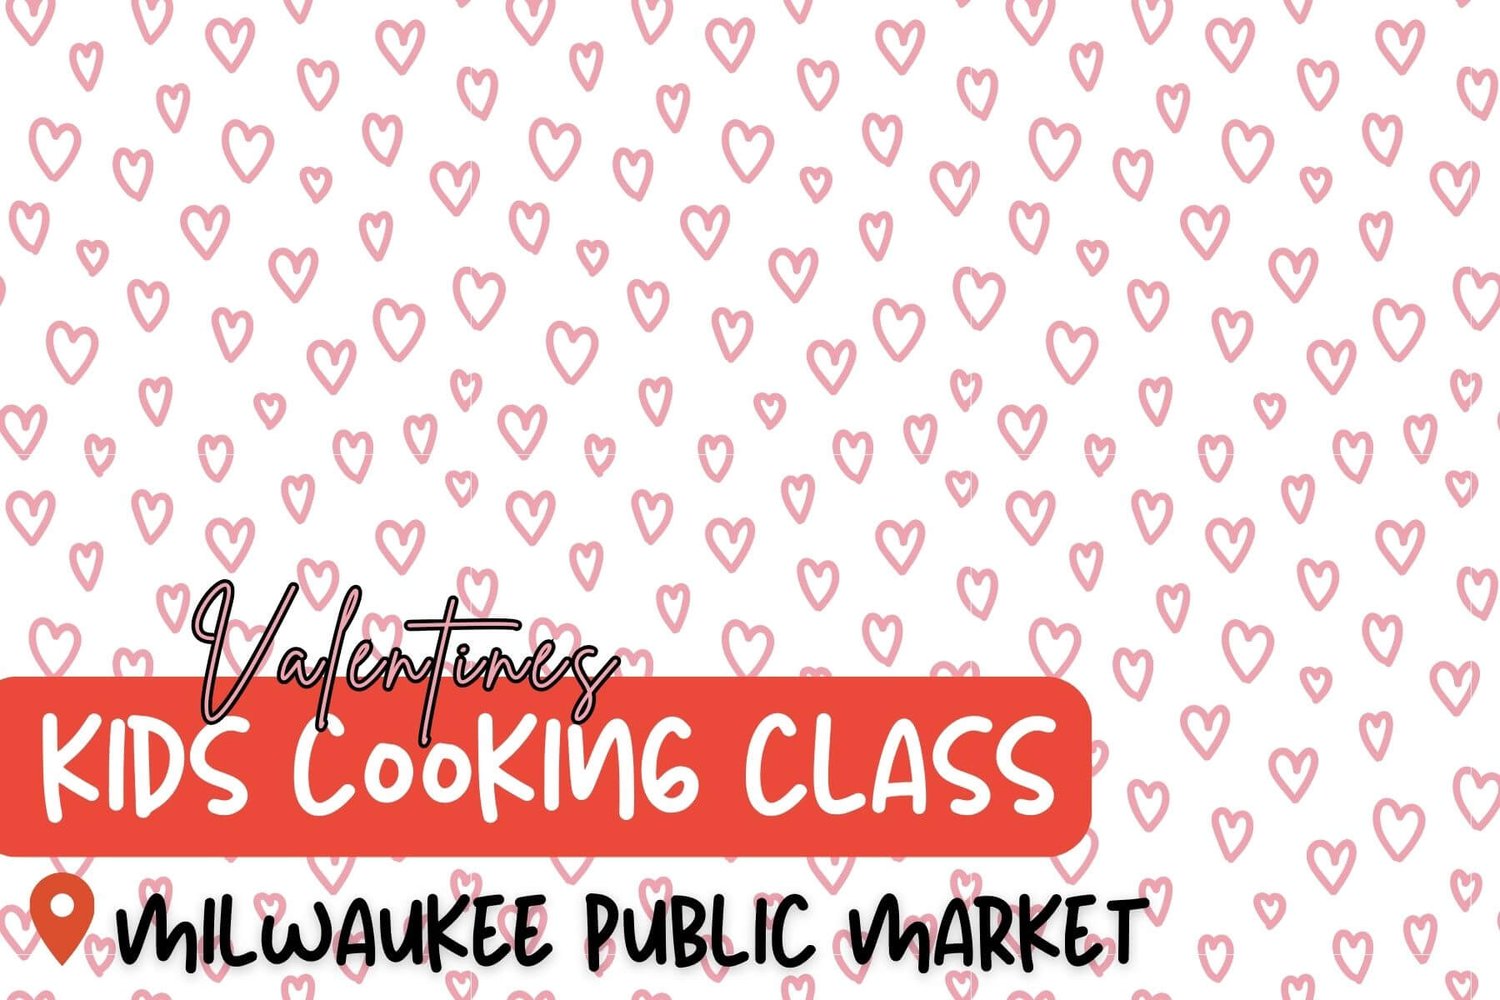 More Happy Valentine's Kids Cooking Class (ages 3-7 with adult) - More Happy Kitchens